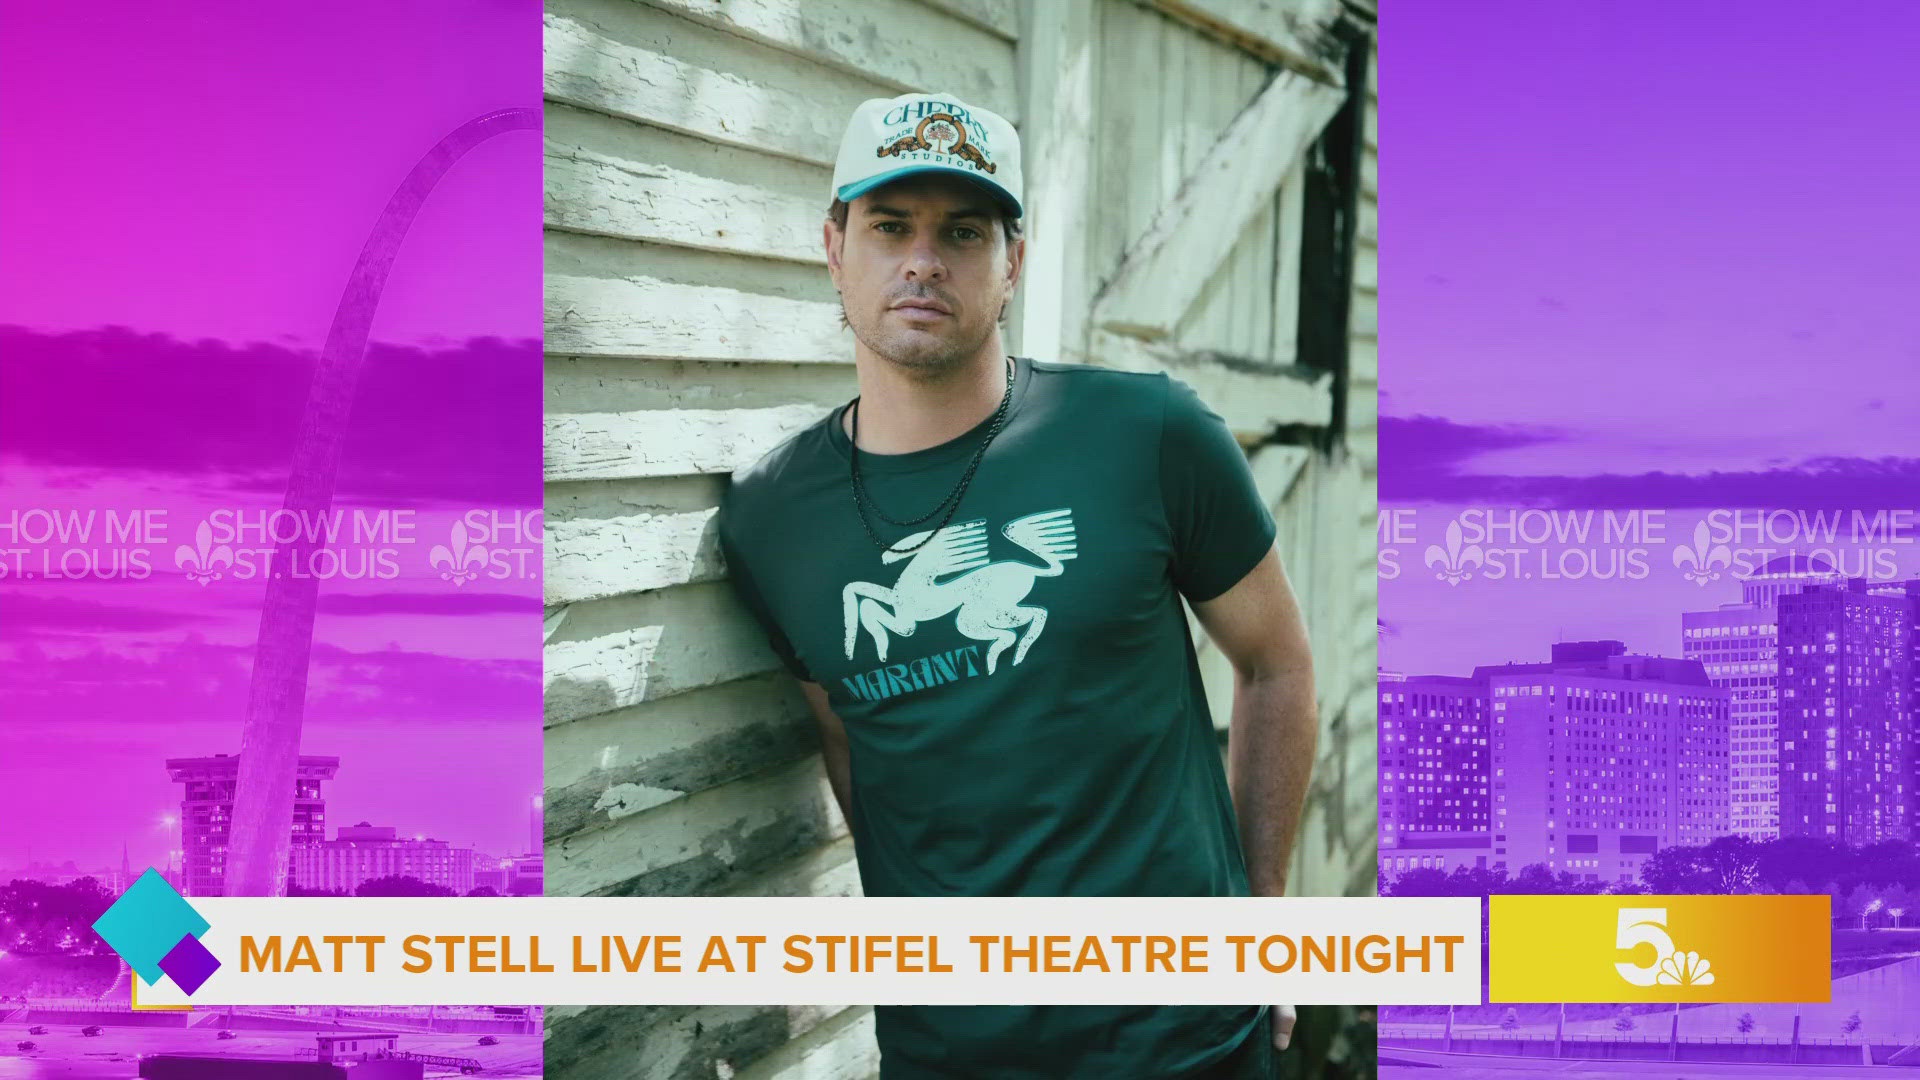 Matt Stell will perform with Lady A, Kimberly Perry at Stifel Theatre in St. Louis.